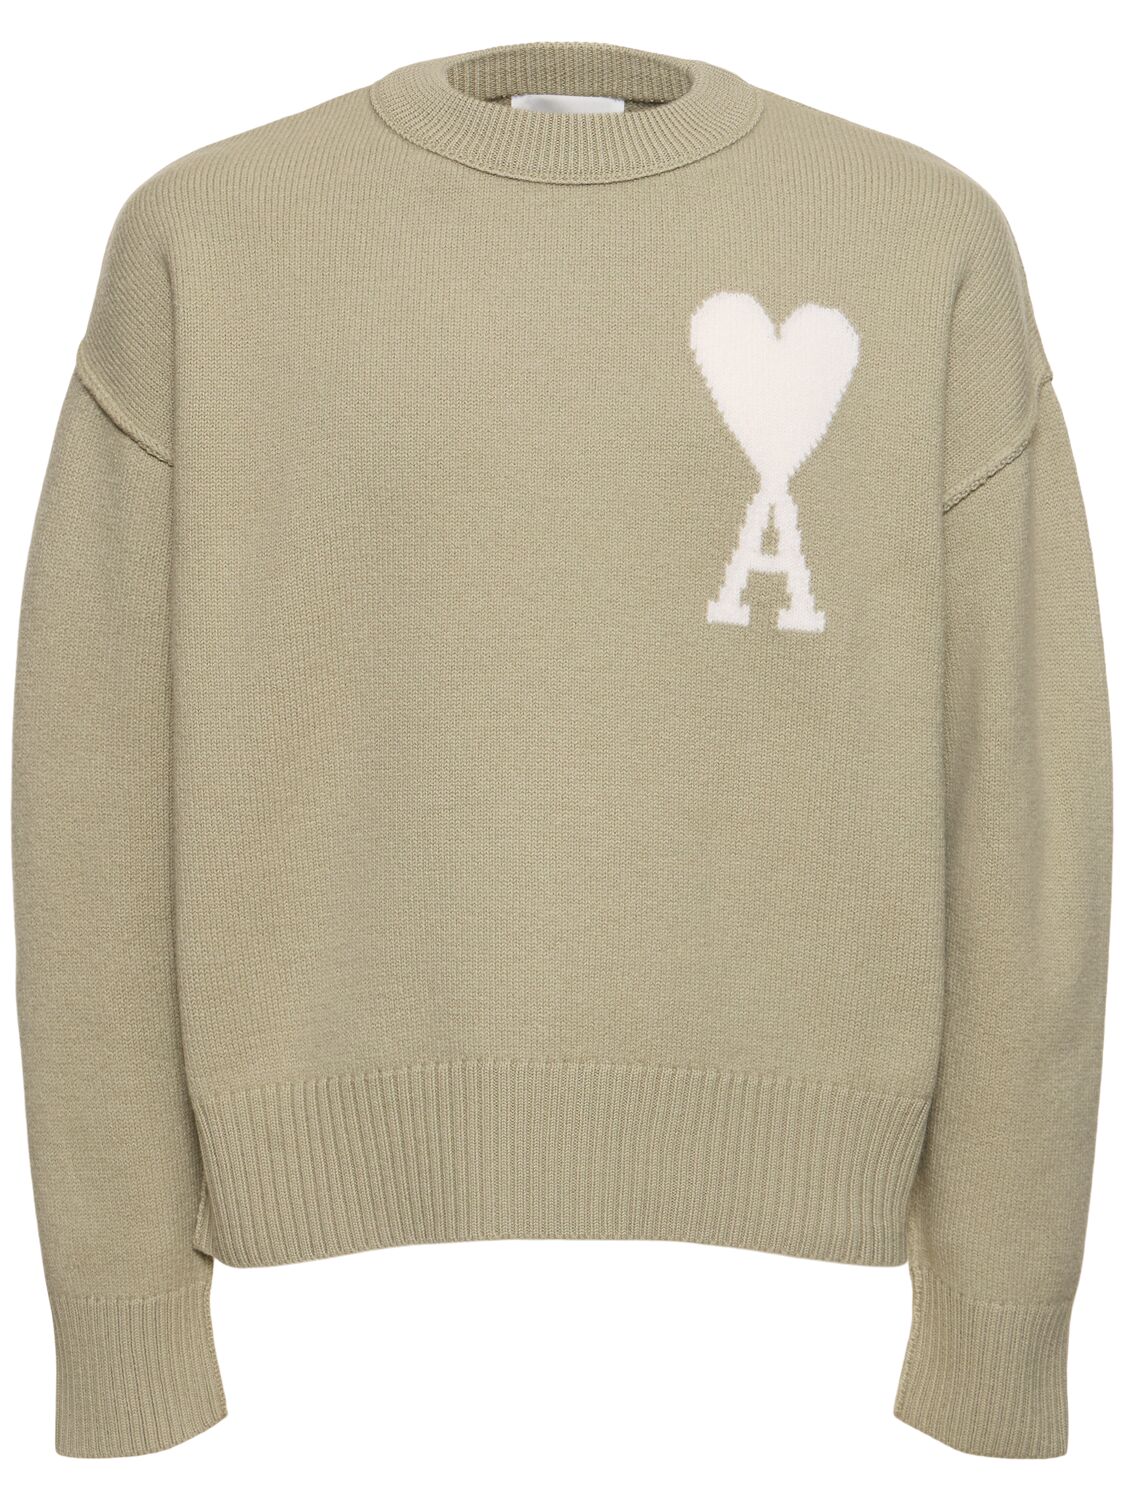 Ami Alexandre Mattiussi Adc Felted Wool Knit Sweater In Sage